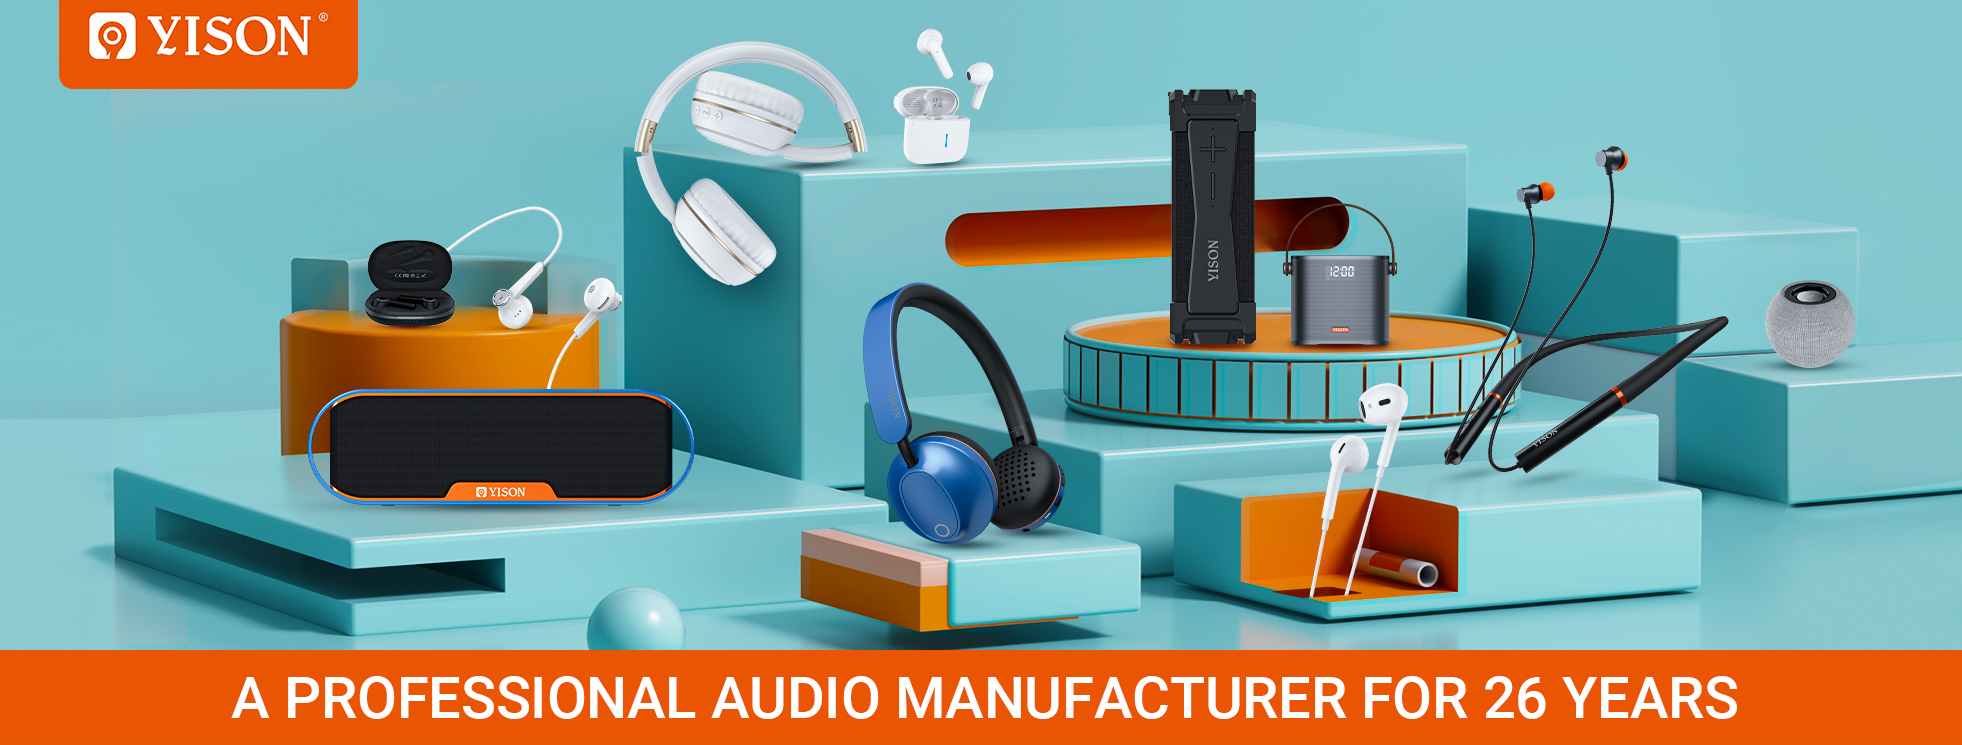 A professional audio manufacturer for 26 years